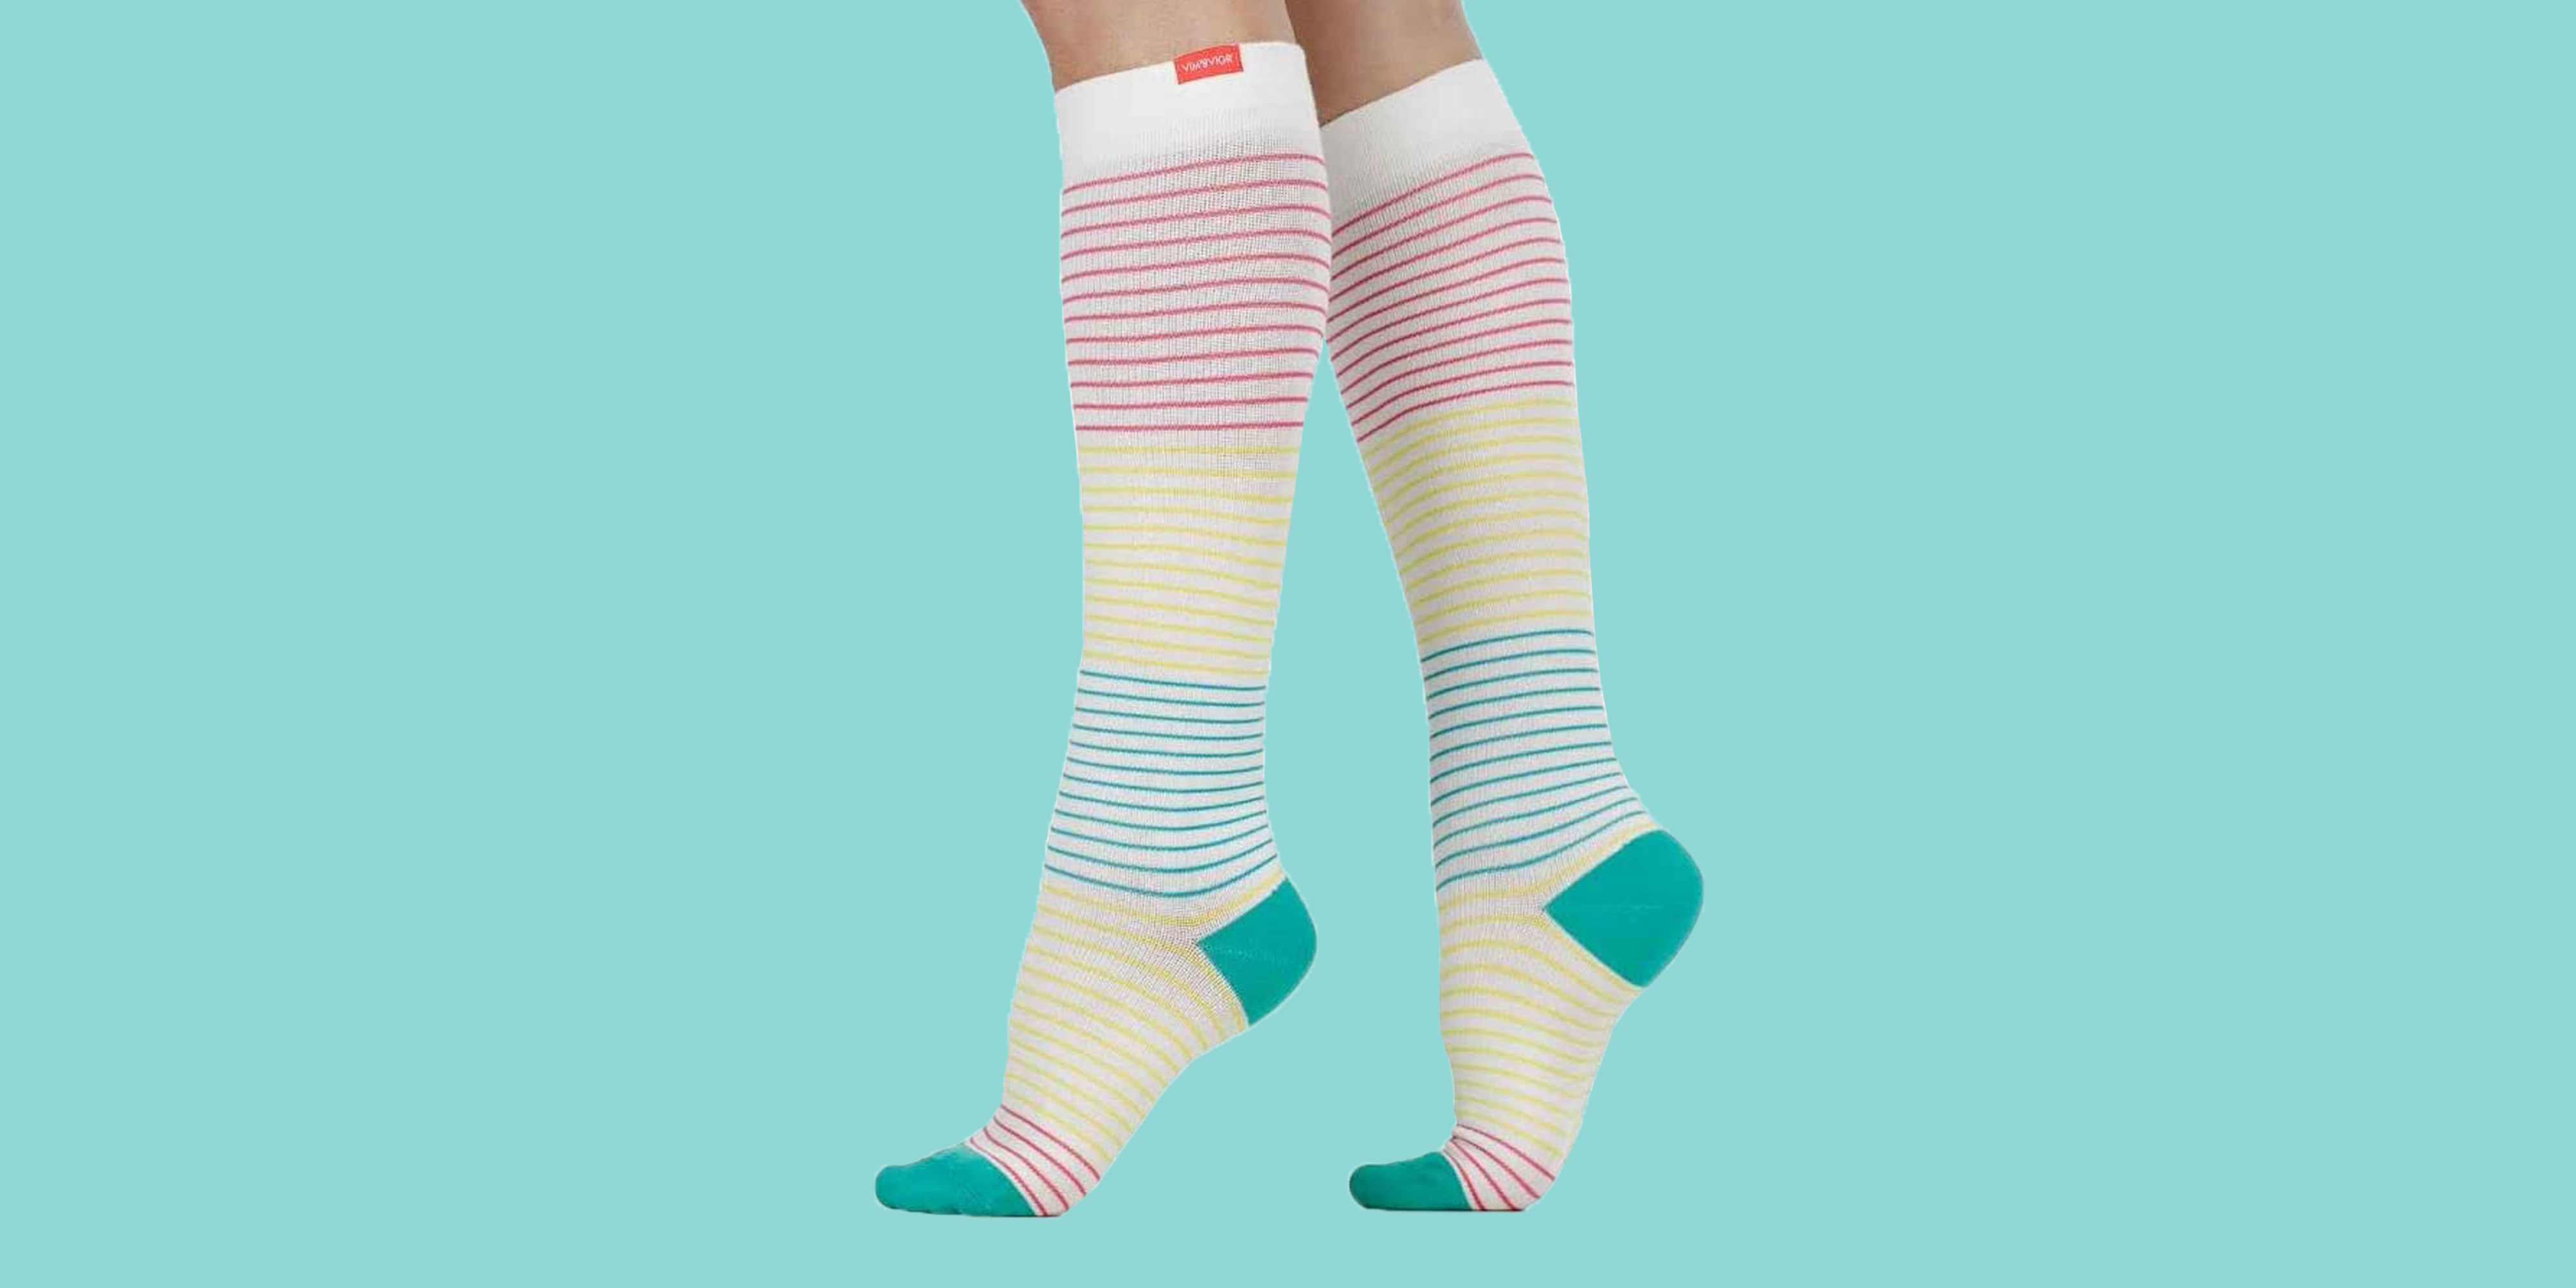 Why Should You Consider Wearing Compression Socks?